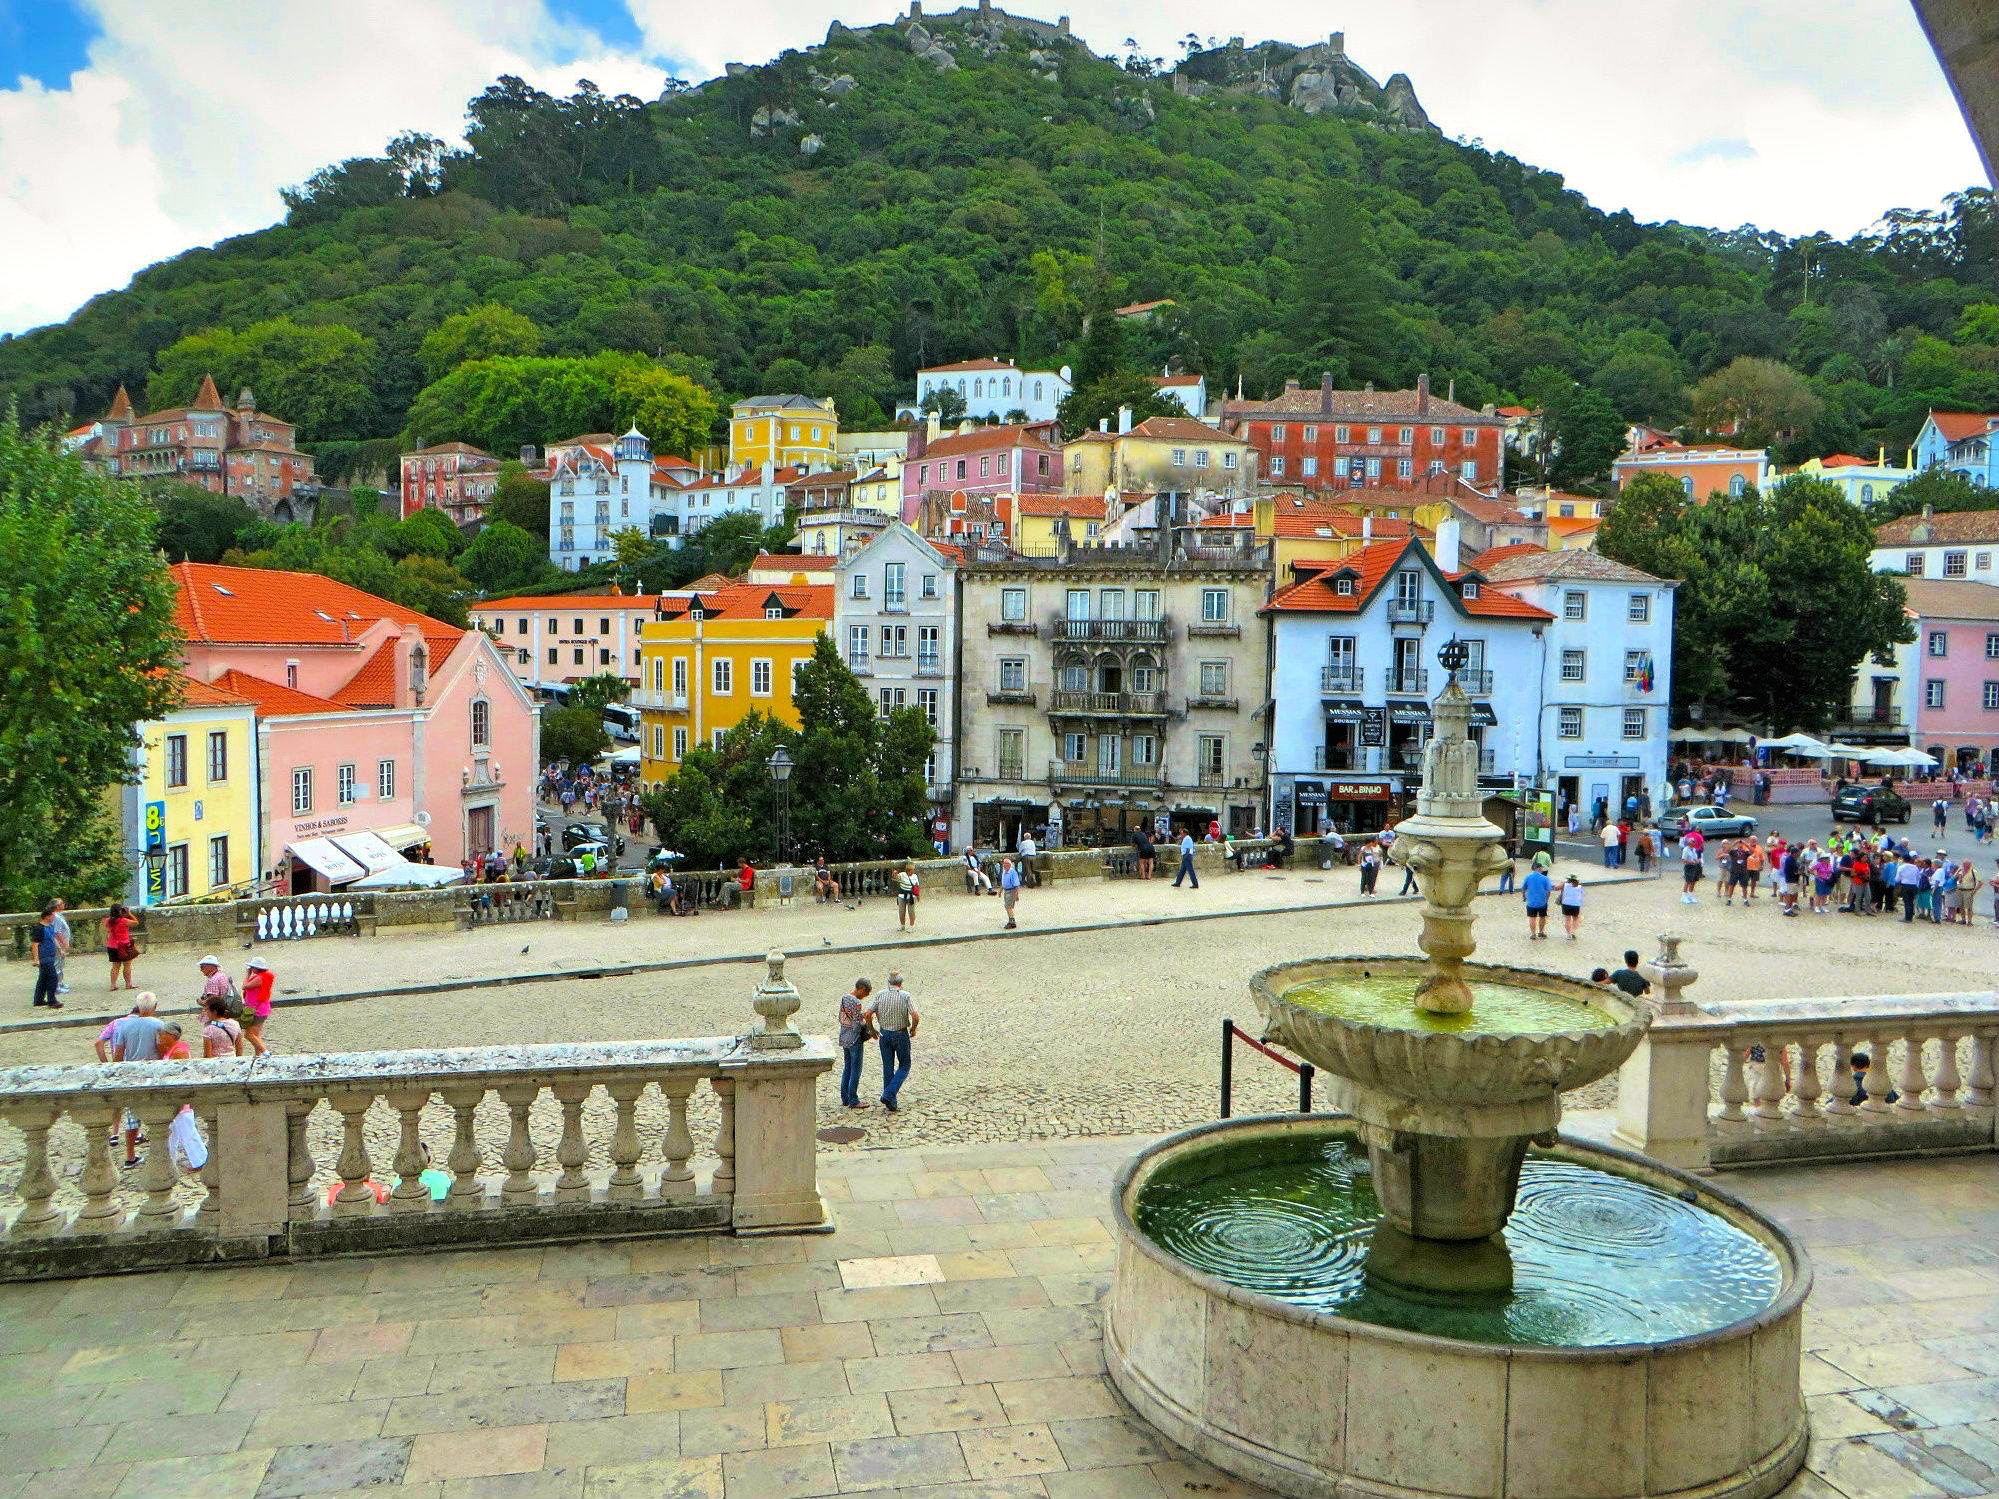 Private tour of Sintra with visit to Pena Palace and Quinta da Regaleira